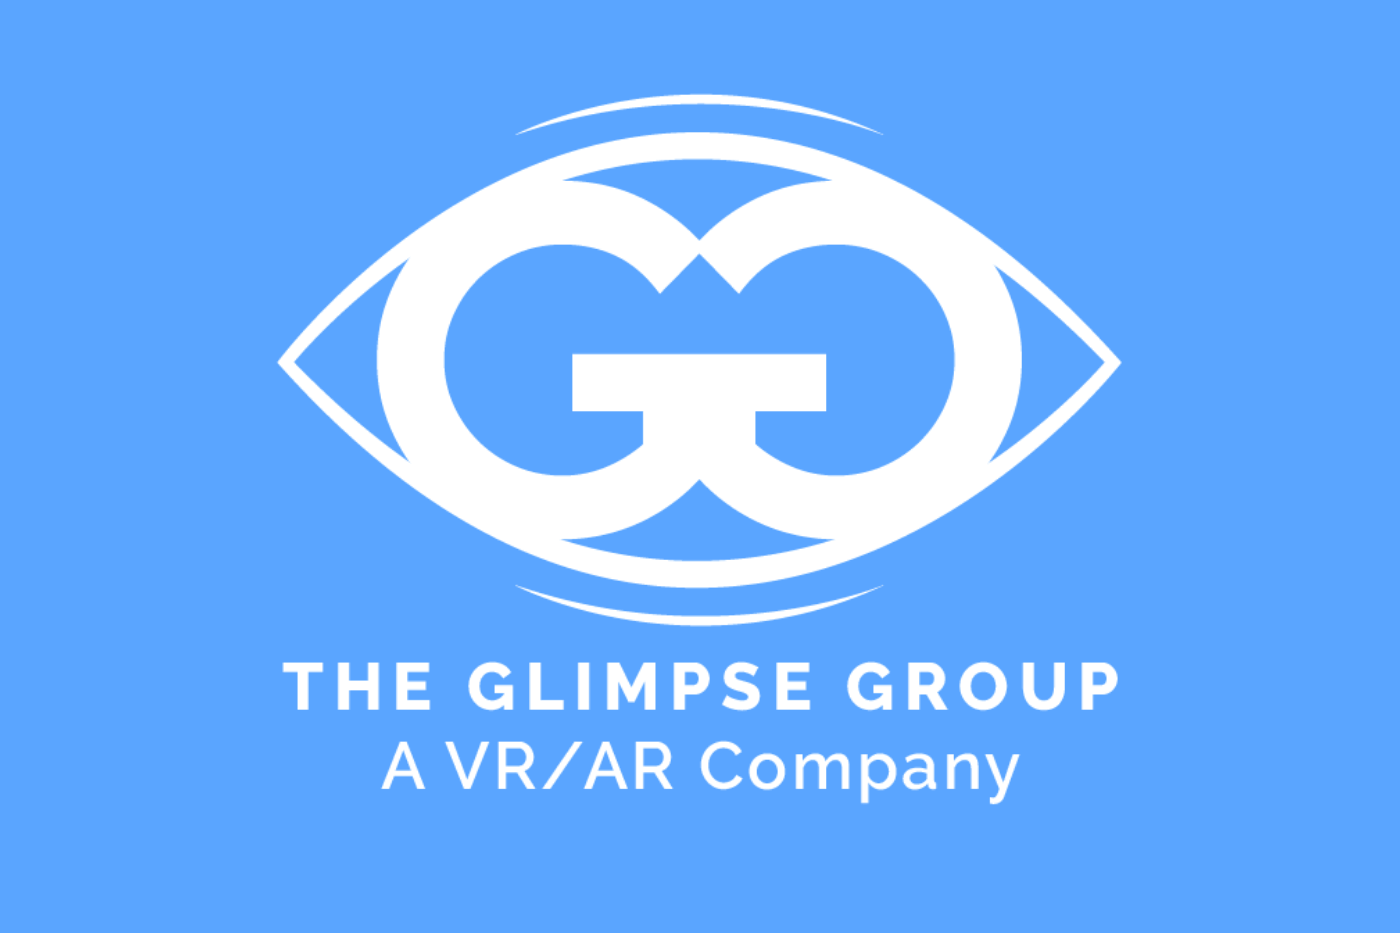 The Glimpse Group IPO, the Metaverse ETF, and a Market Coming of Age